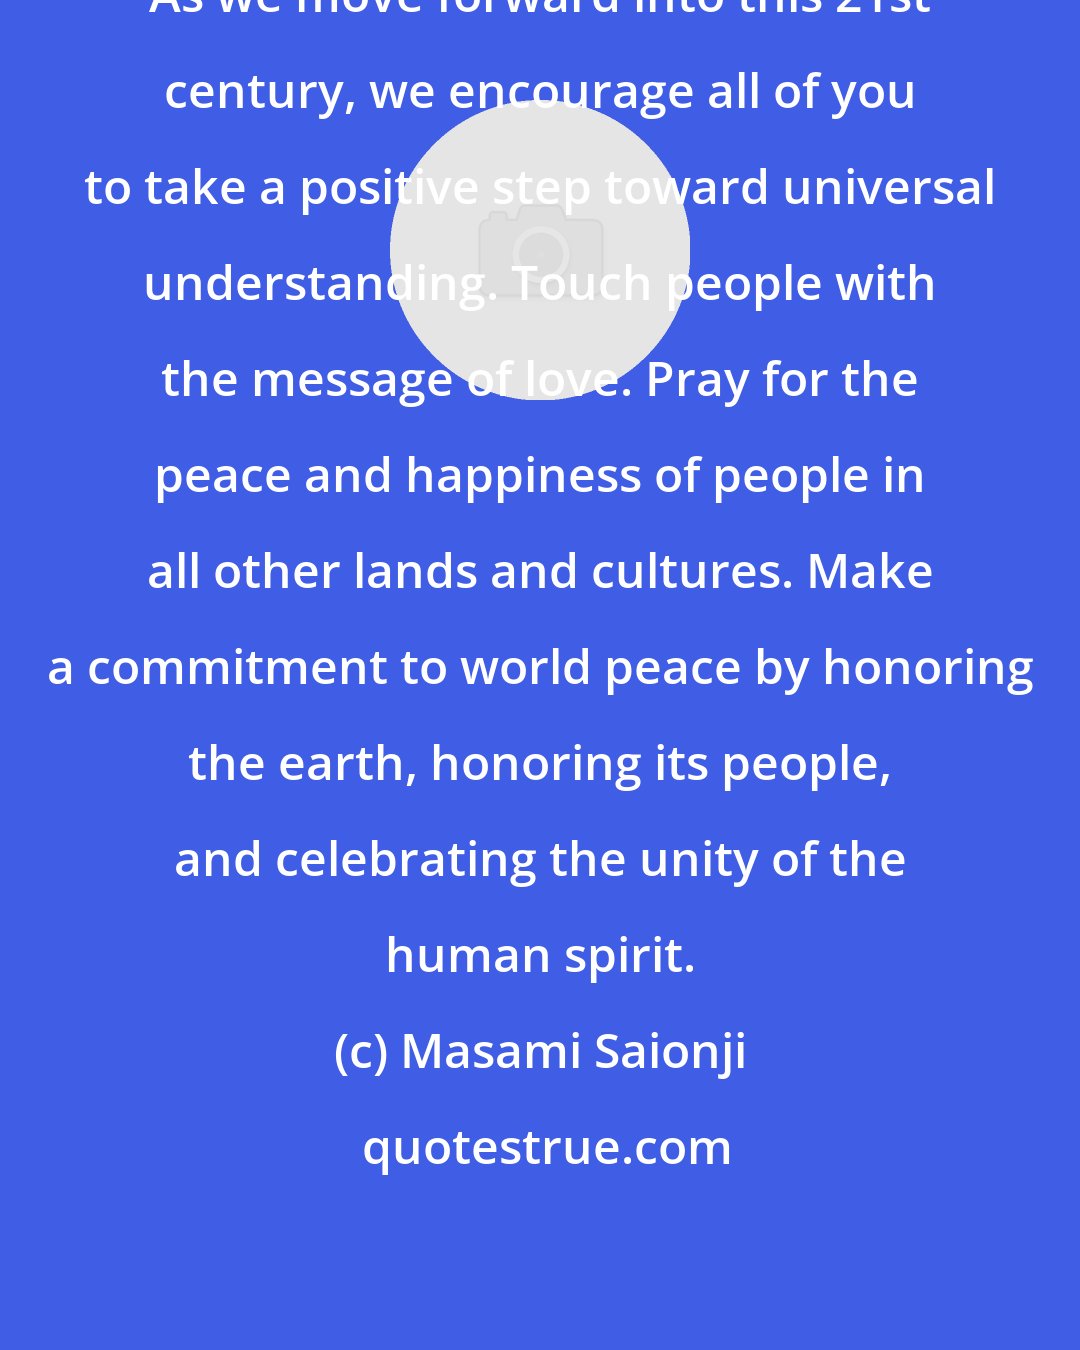 Masami Saionji: As we move forward into this 21st century, we encourage all of you to take a positive step toward universal understanding. Touch people with the message of love. Pray for the peace and happiness of people in all other lands and cultures. Make a commitment to world peace by honoring the earth, honoring its people, and celebrating the unity of the human spirit.